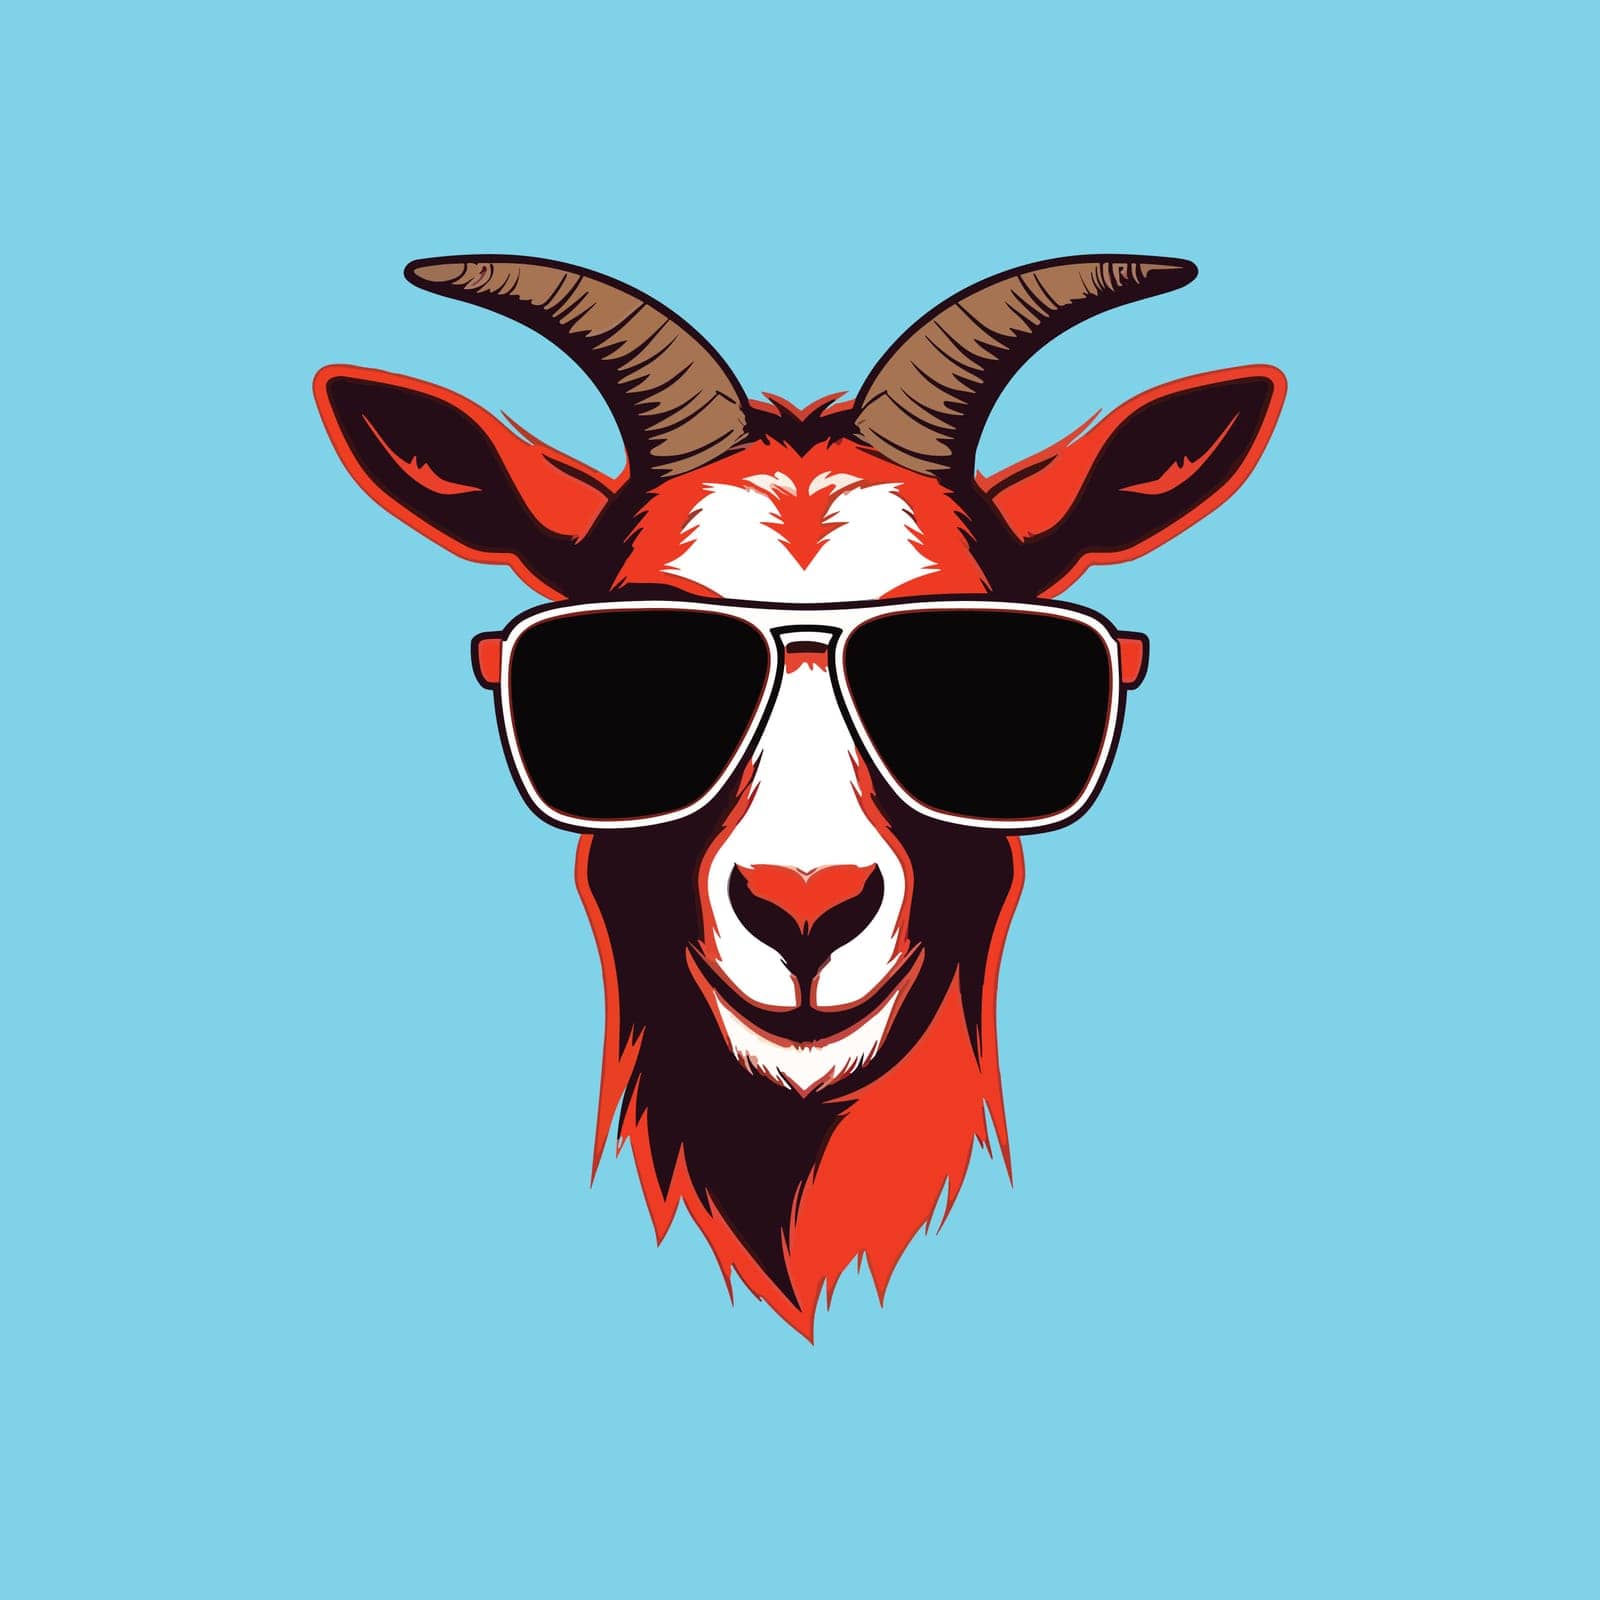 Portrait of Goat with sunglasses by Vinhsino